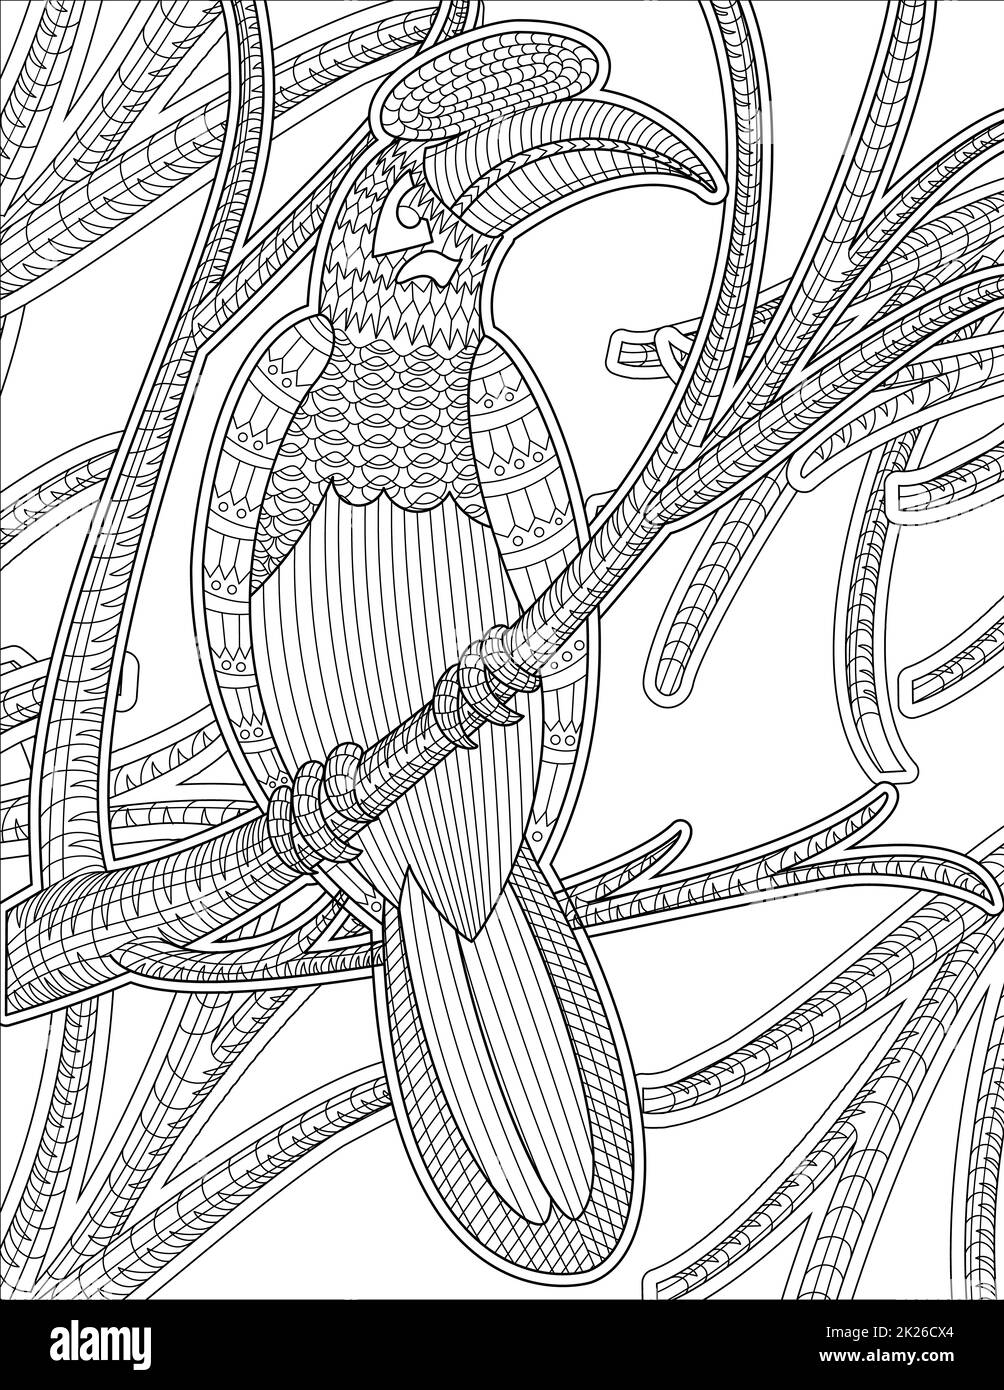 Macaw Resting On A Tree Branch With Small Leaves Colorless Line Drawing. Small Toucan Staying On Twig Coloring Book Page. Stock Photo